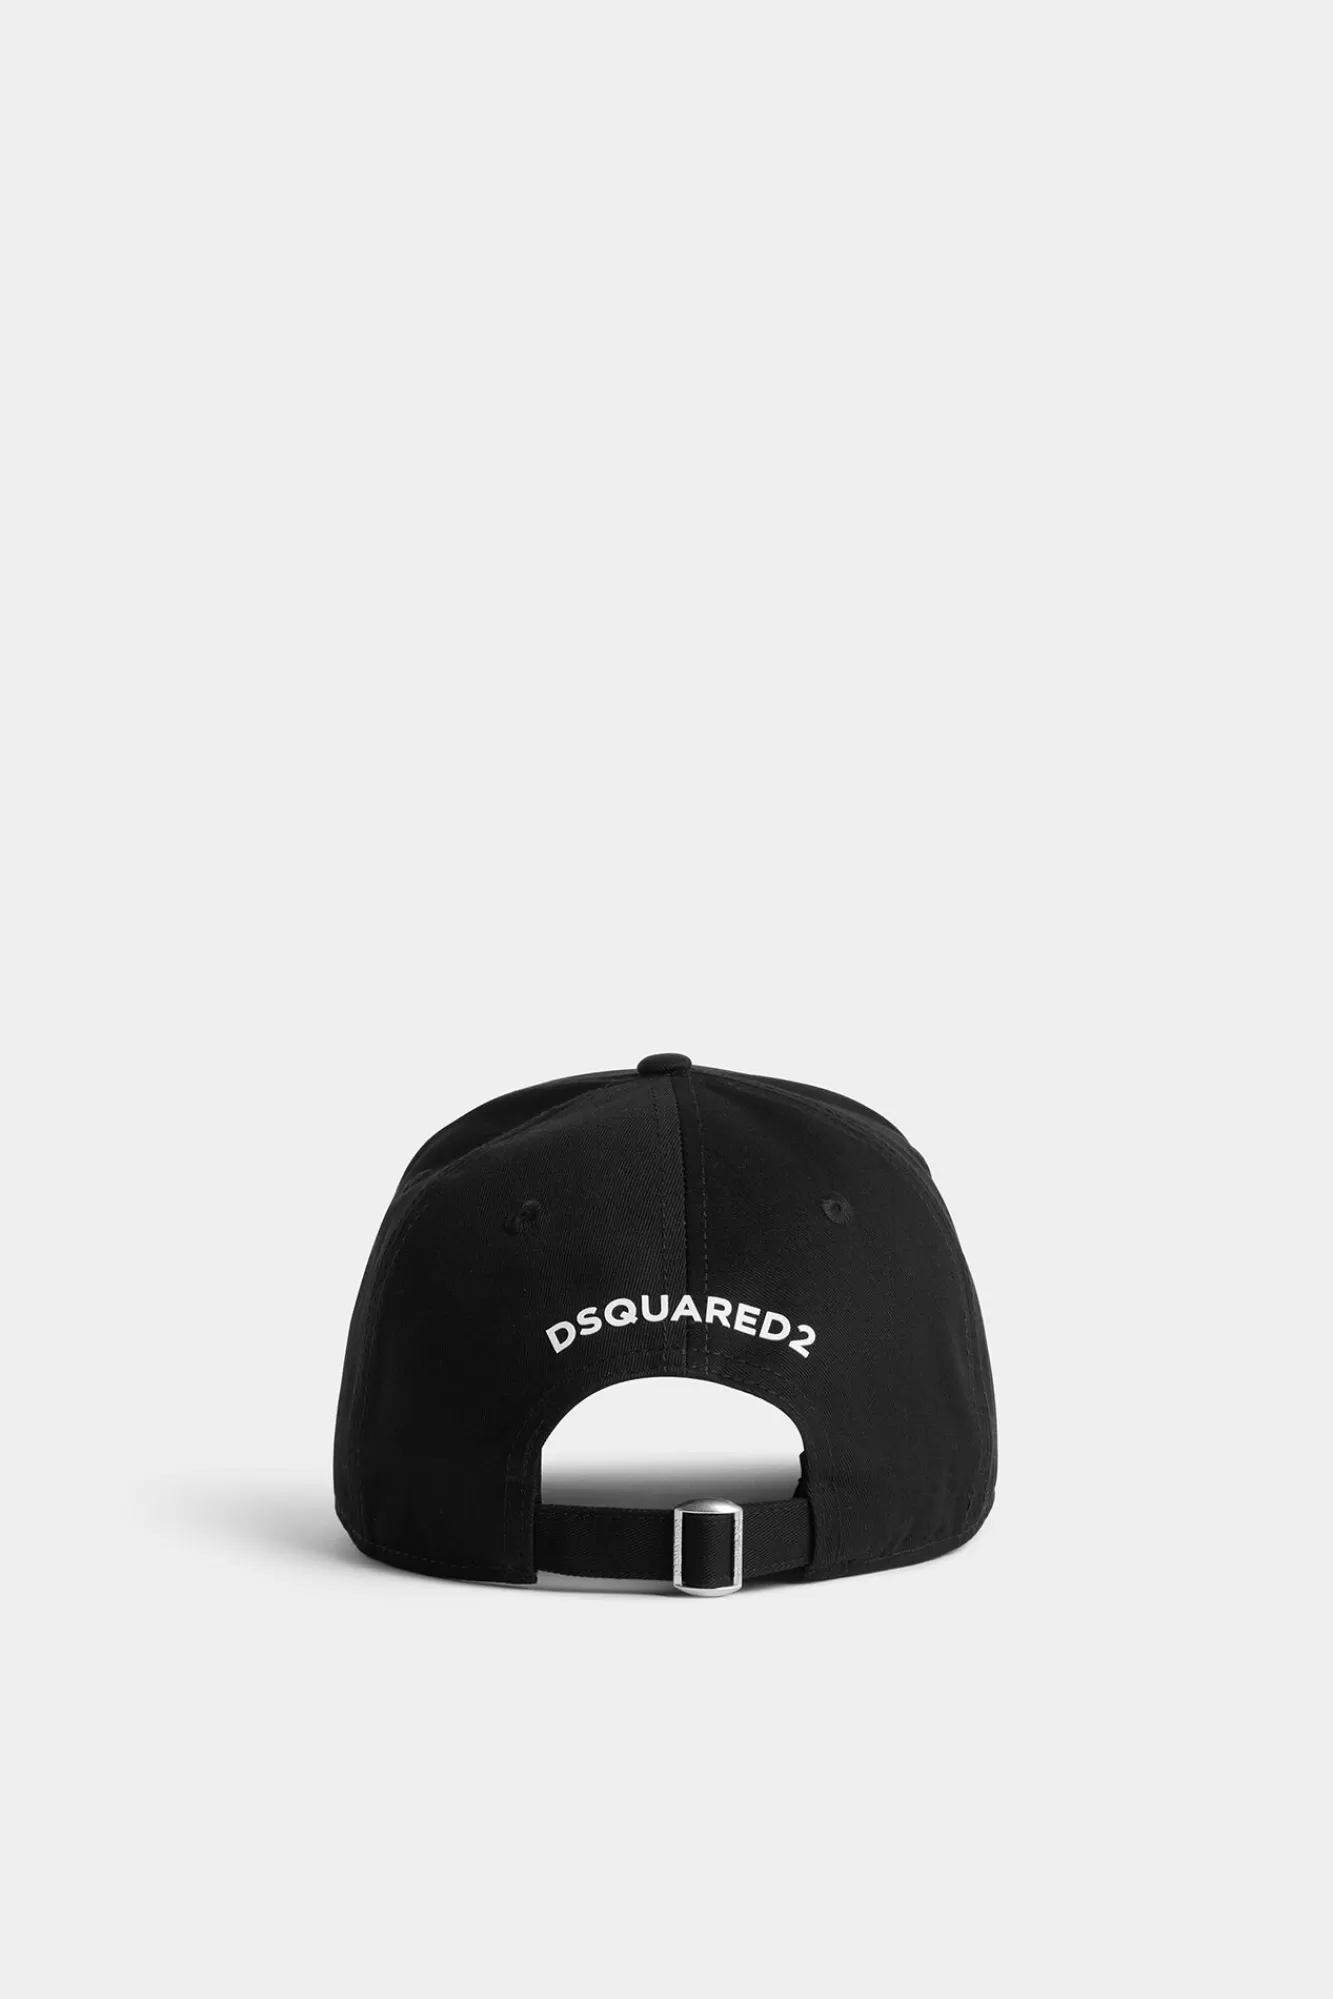 Manchester City Baseball Cap<Dsquared2 Clearance